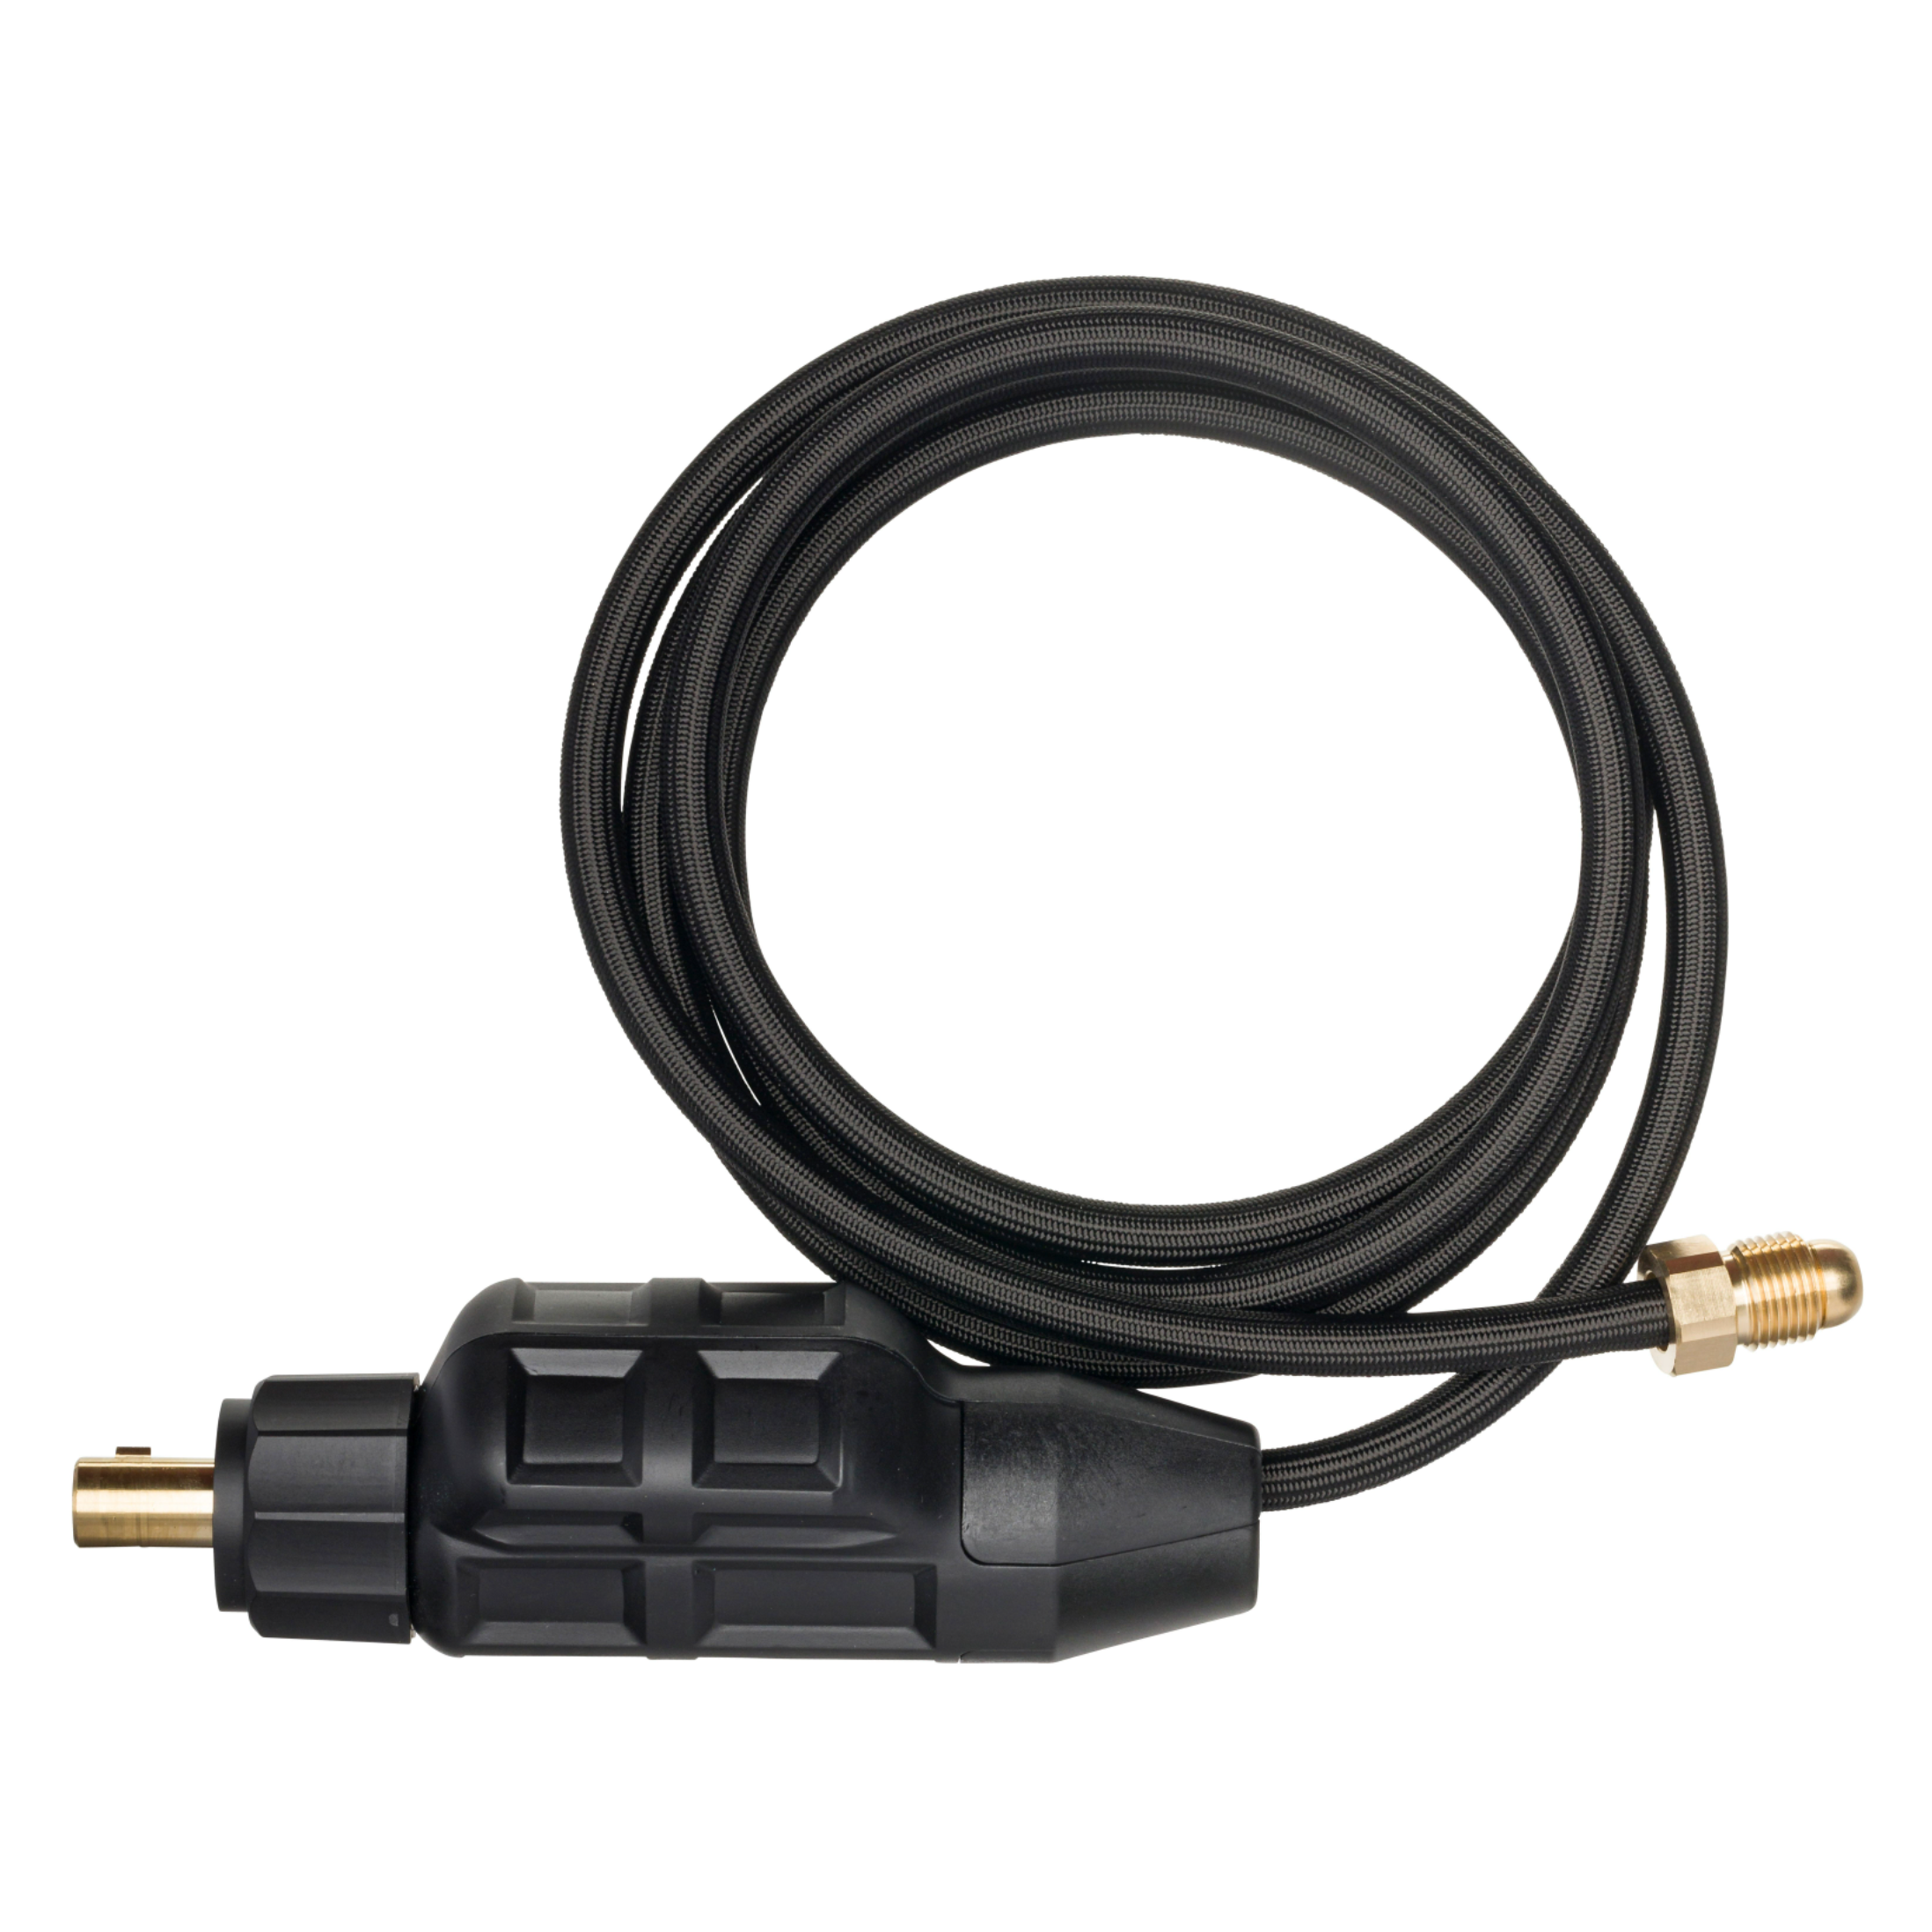 CK Worldwide SL2-35 50mm Air-Cooled Male Dinse Connector